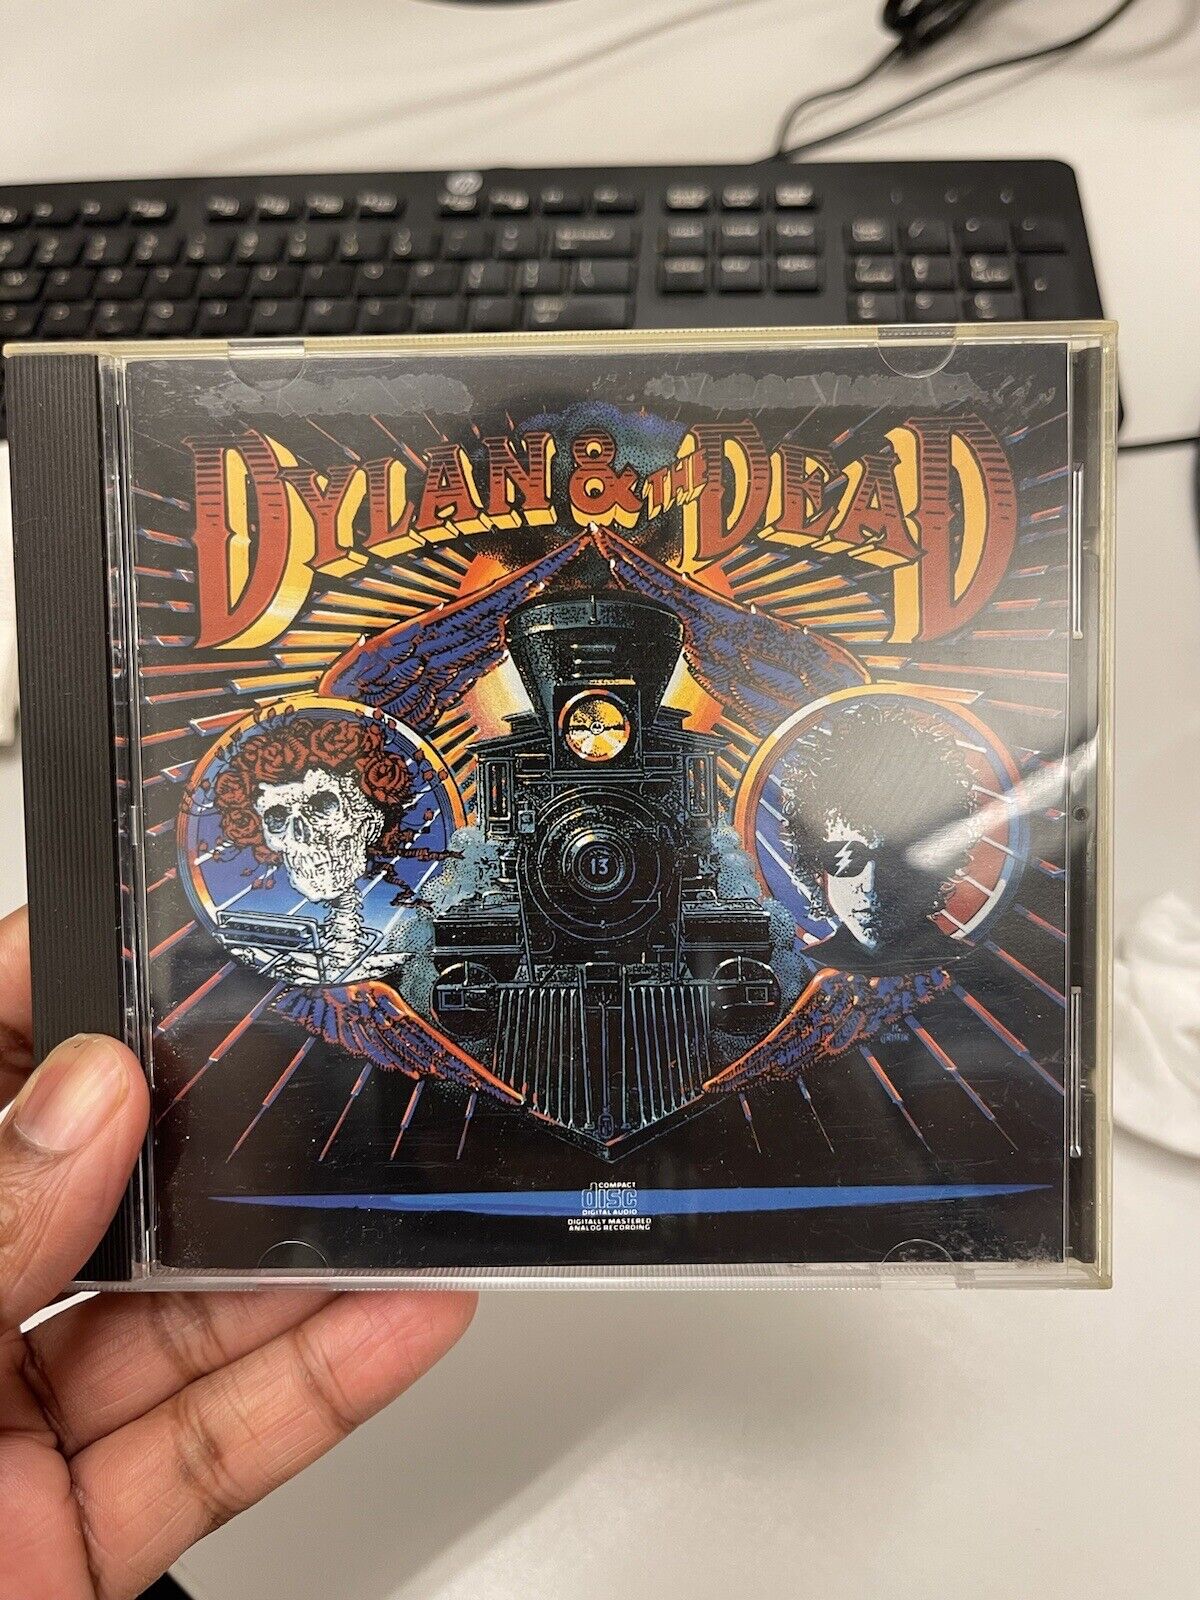 Dylan & the Dead by Grateful Dead/Bob Dylan (CD, Jan-1989, Columbia (USA))